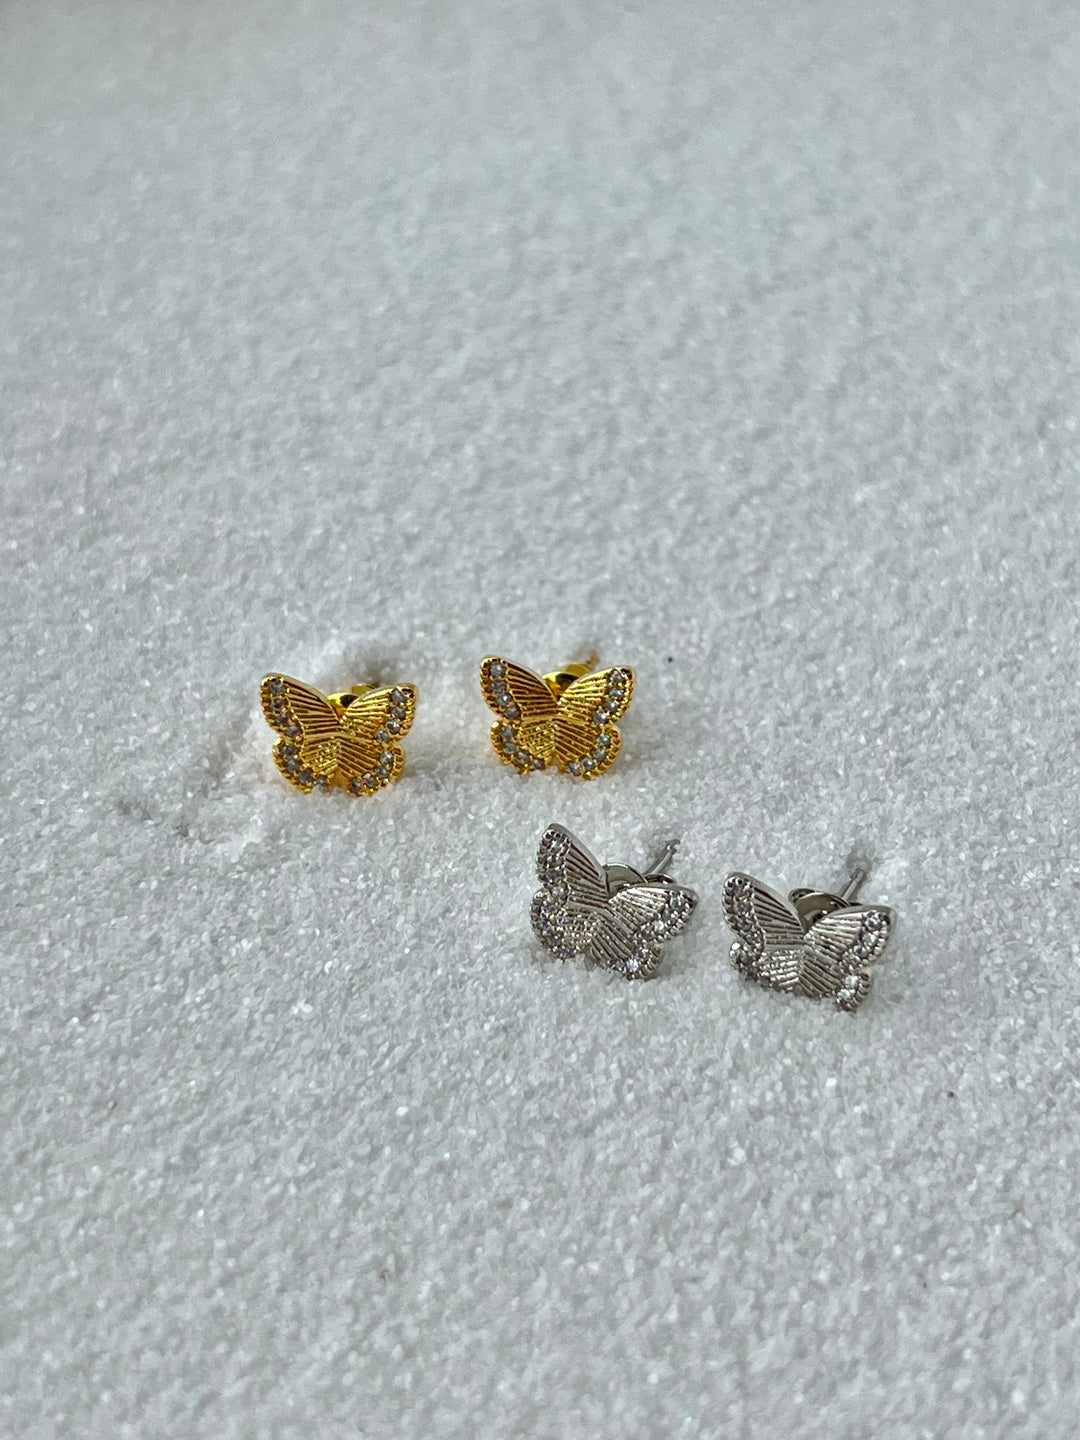 14K Gold/Silver Dipped Butterfly Studs, Jewelry, Adeline, Adeline, dallas boutique, dallas texas, texas boutique, women's boutique dallas, adeline boutique, dallas boutique, trendy boutique, affordable boutique